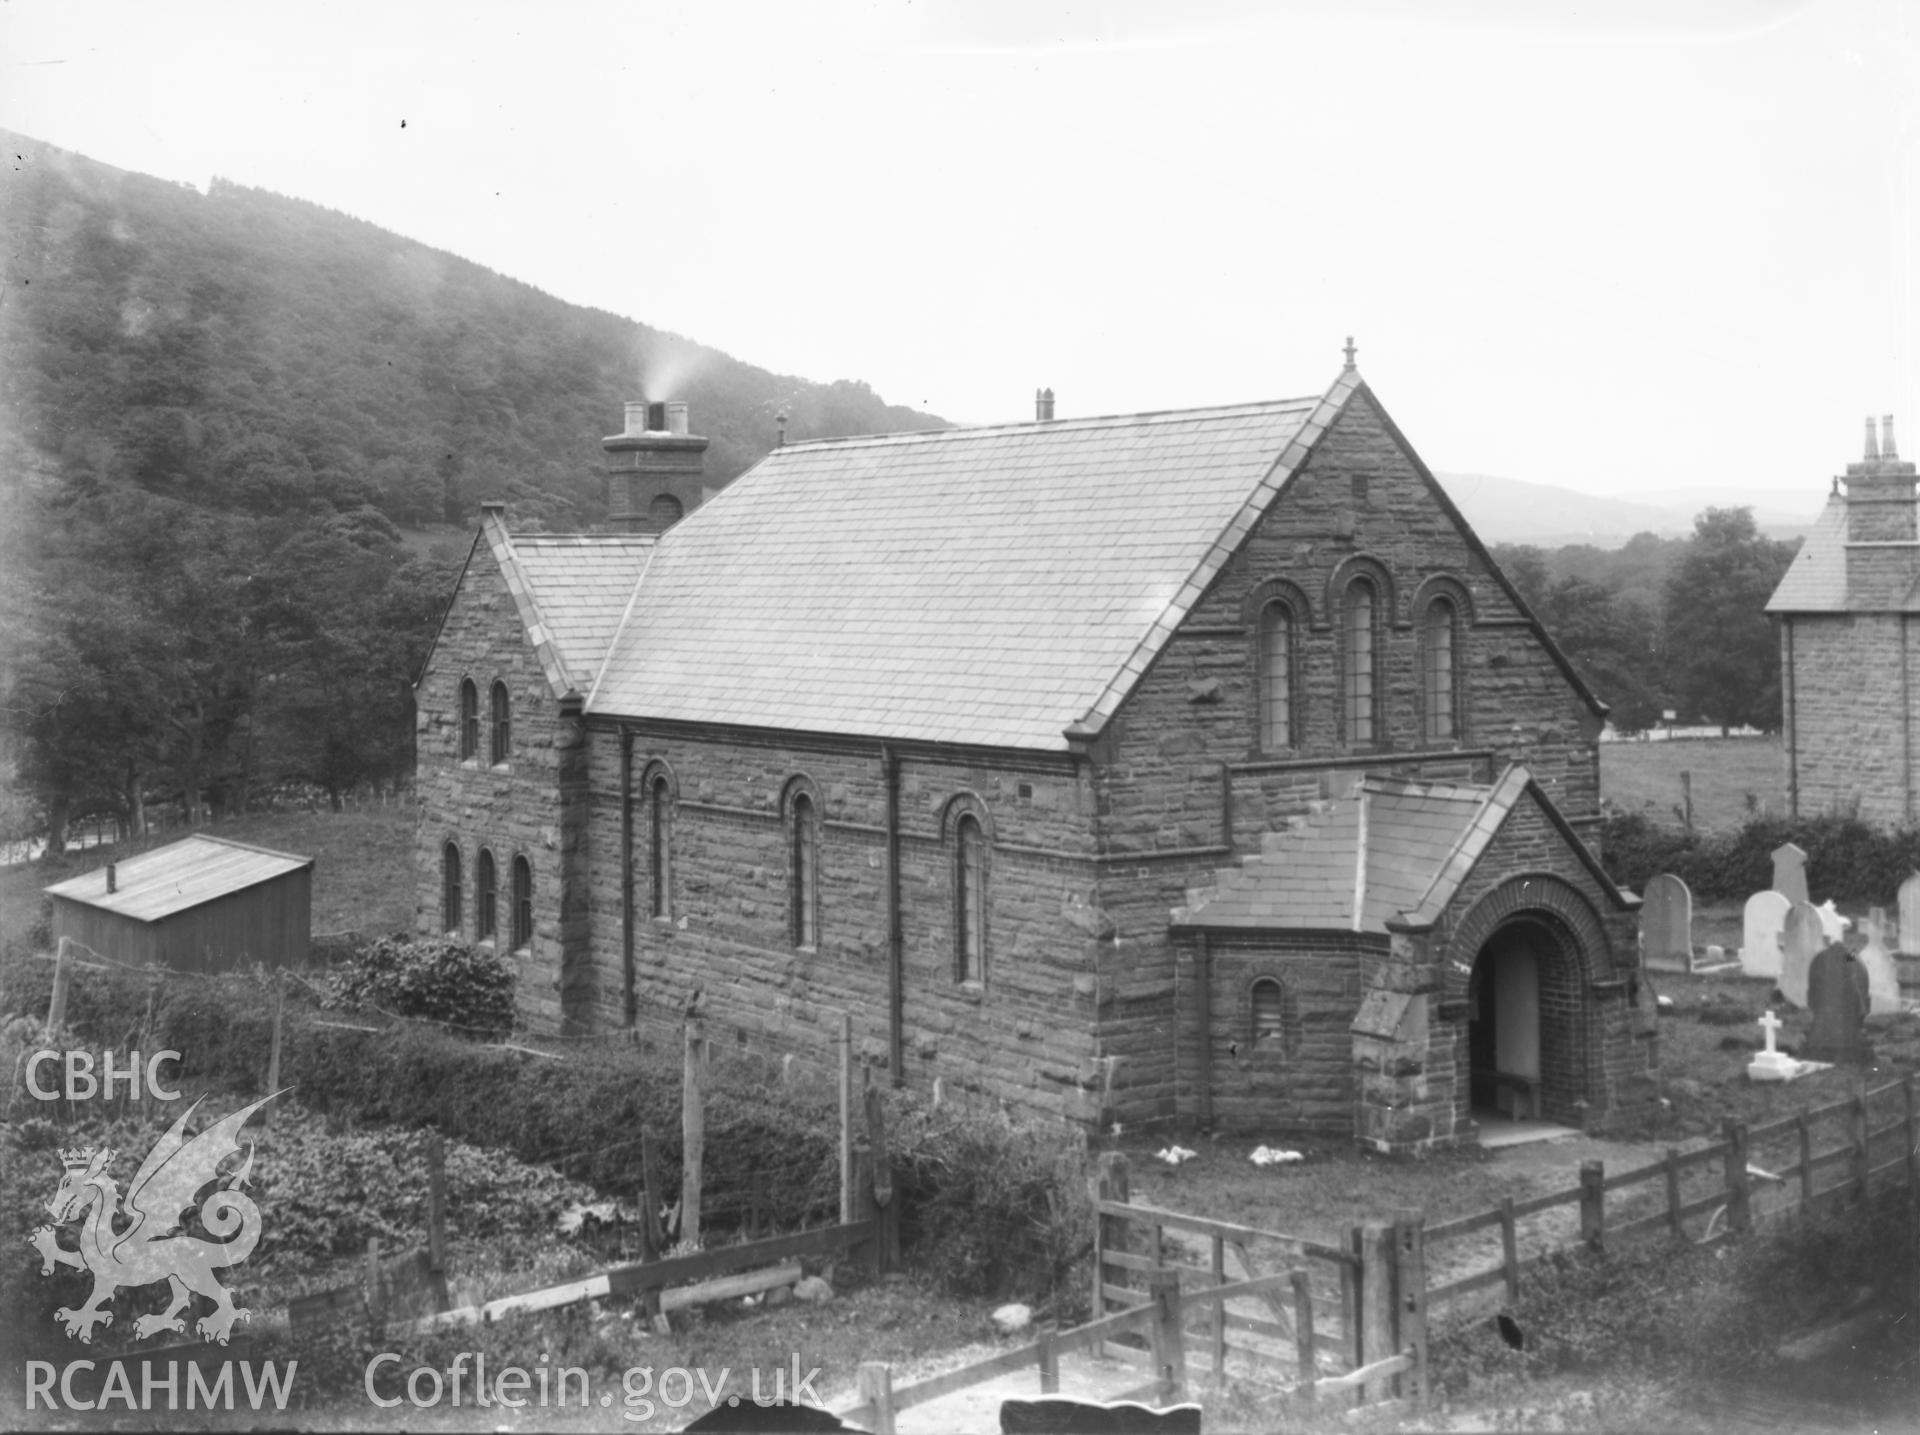 Black and white acetate negative showing a view of Rhayader Church.